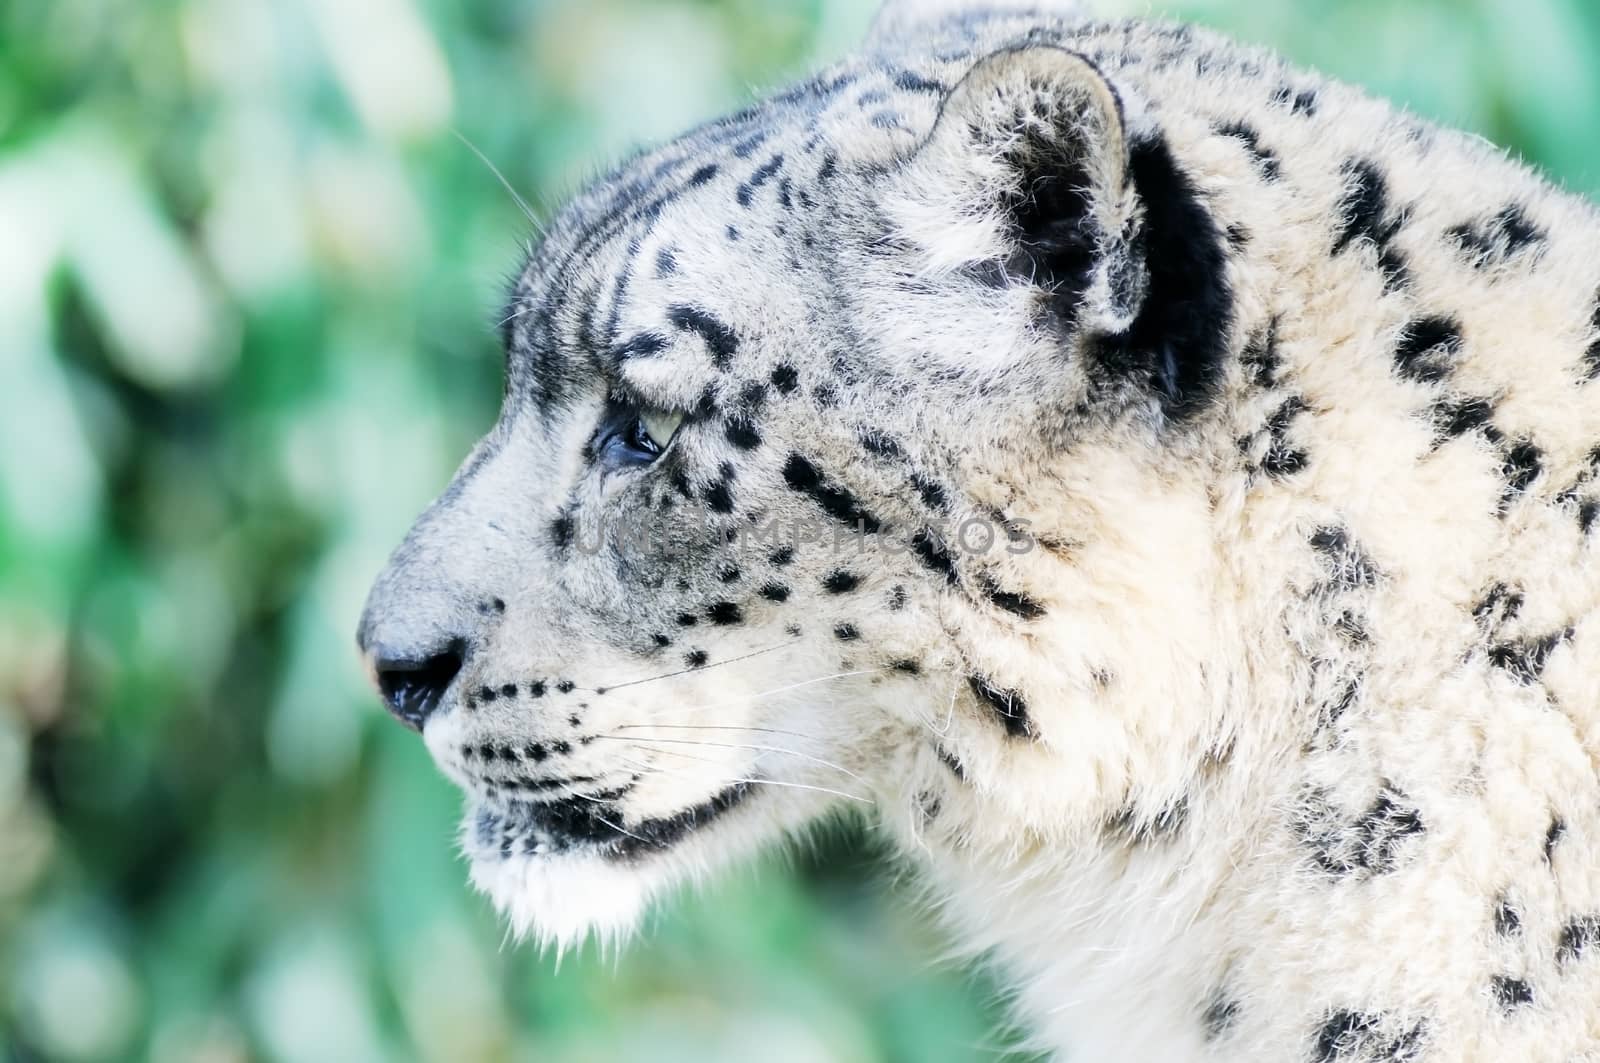 Closeup of snow leopard face and head with fur detail 